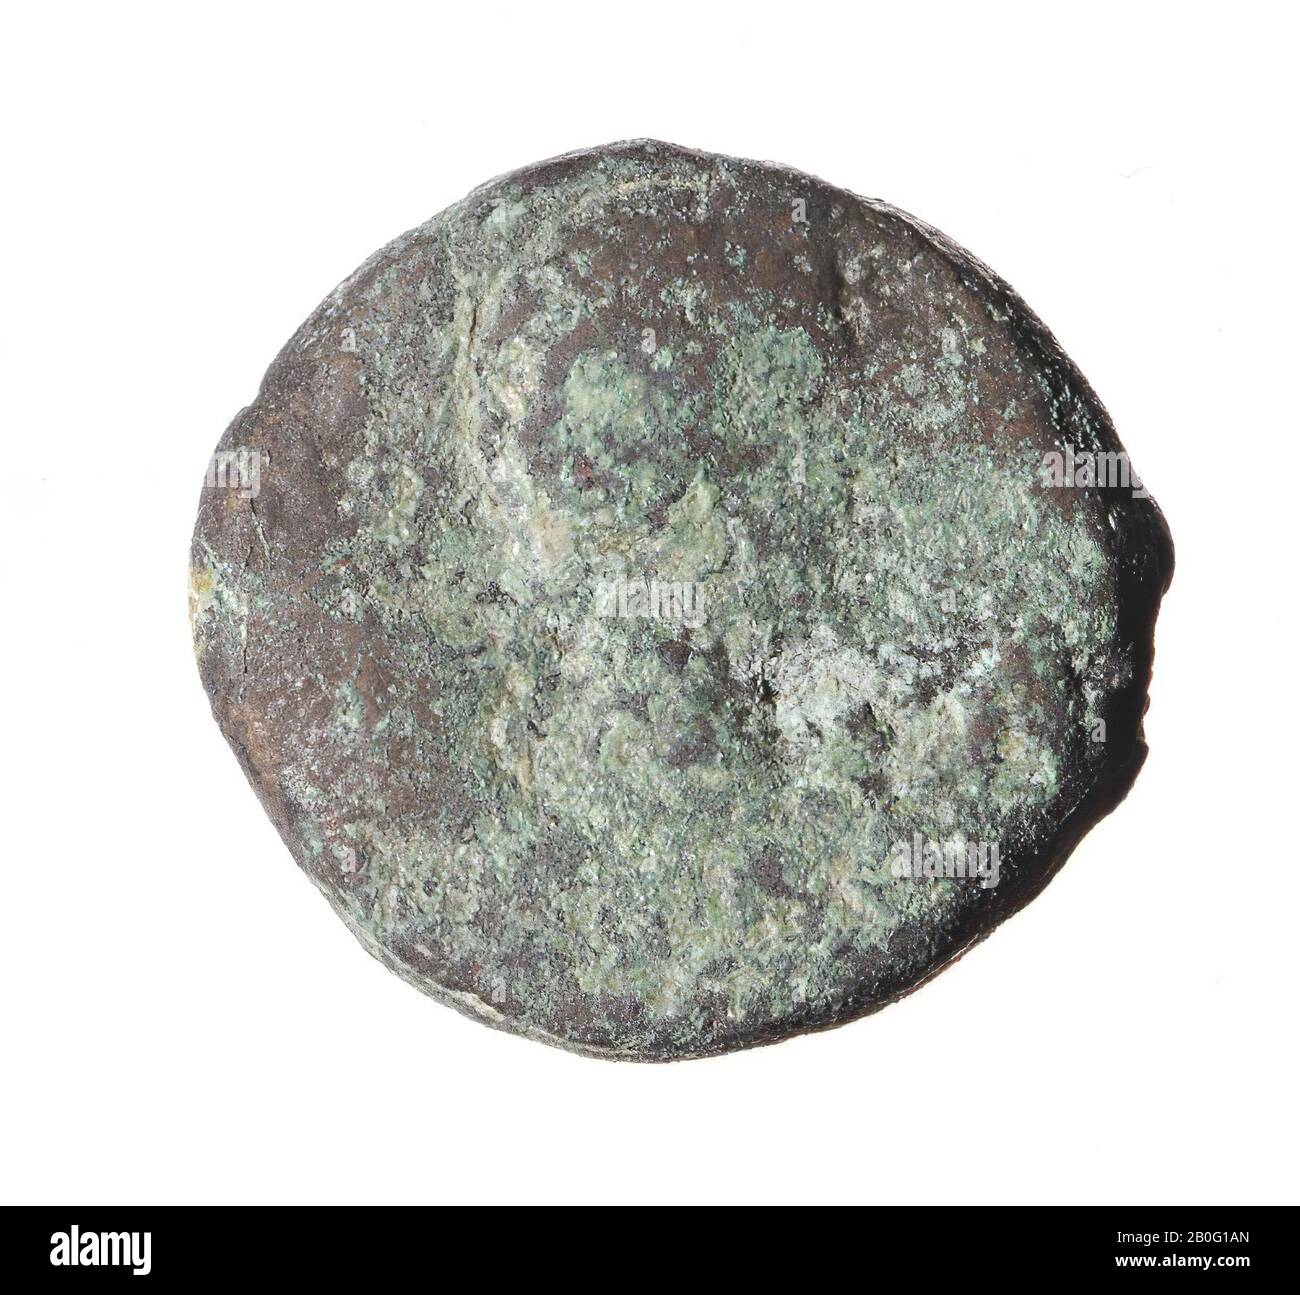 Egypt, coin, AES-20, August, metal, copper, Diam., 20 mm, wt., 7.12 gr, Greco-Roman Period, Roman imperial period BC 31-14 AD, Egypt Stock Photo